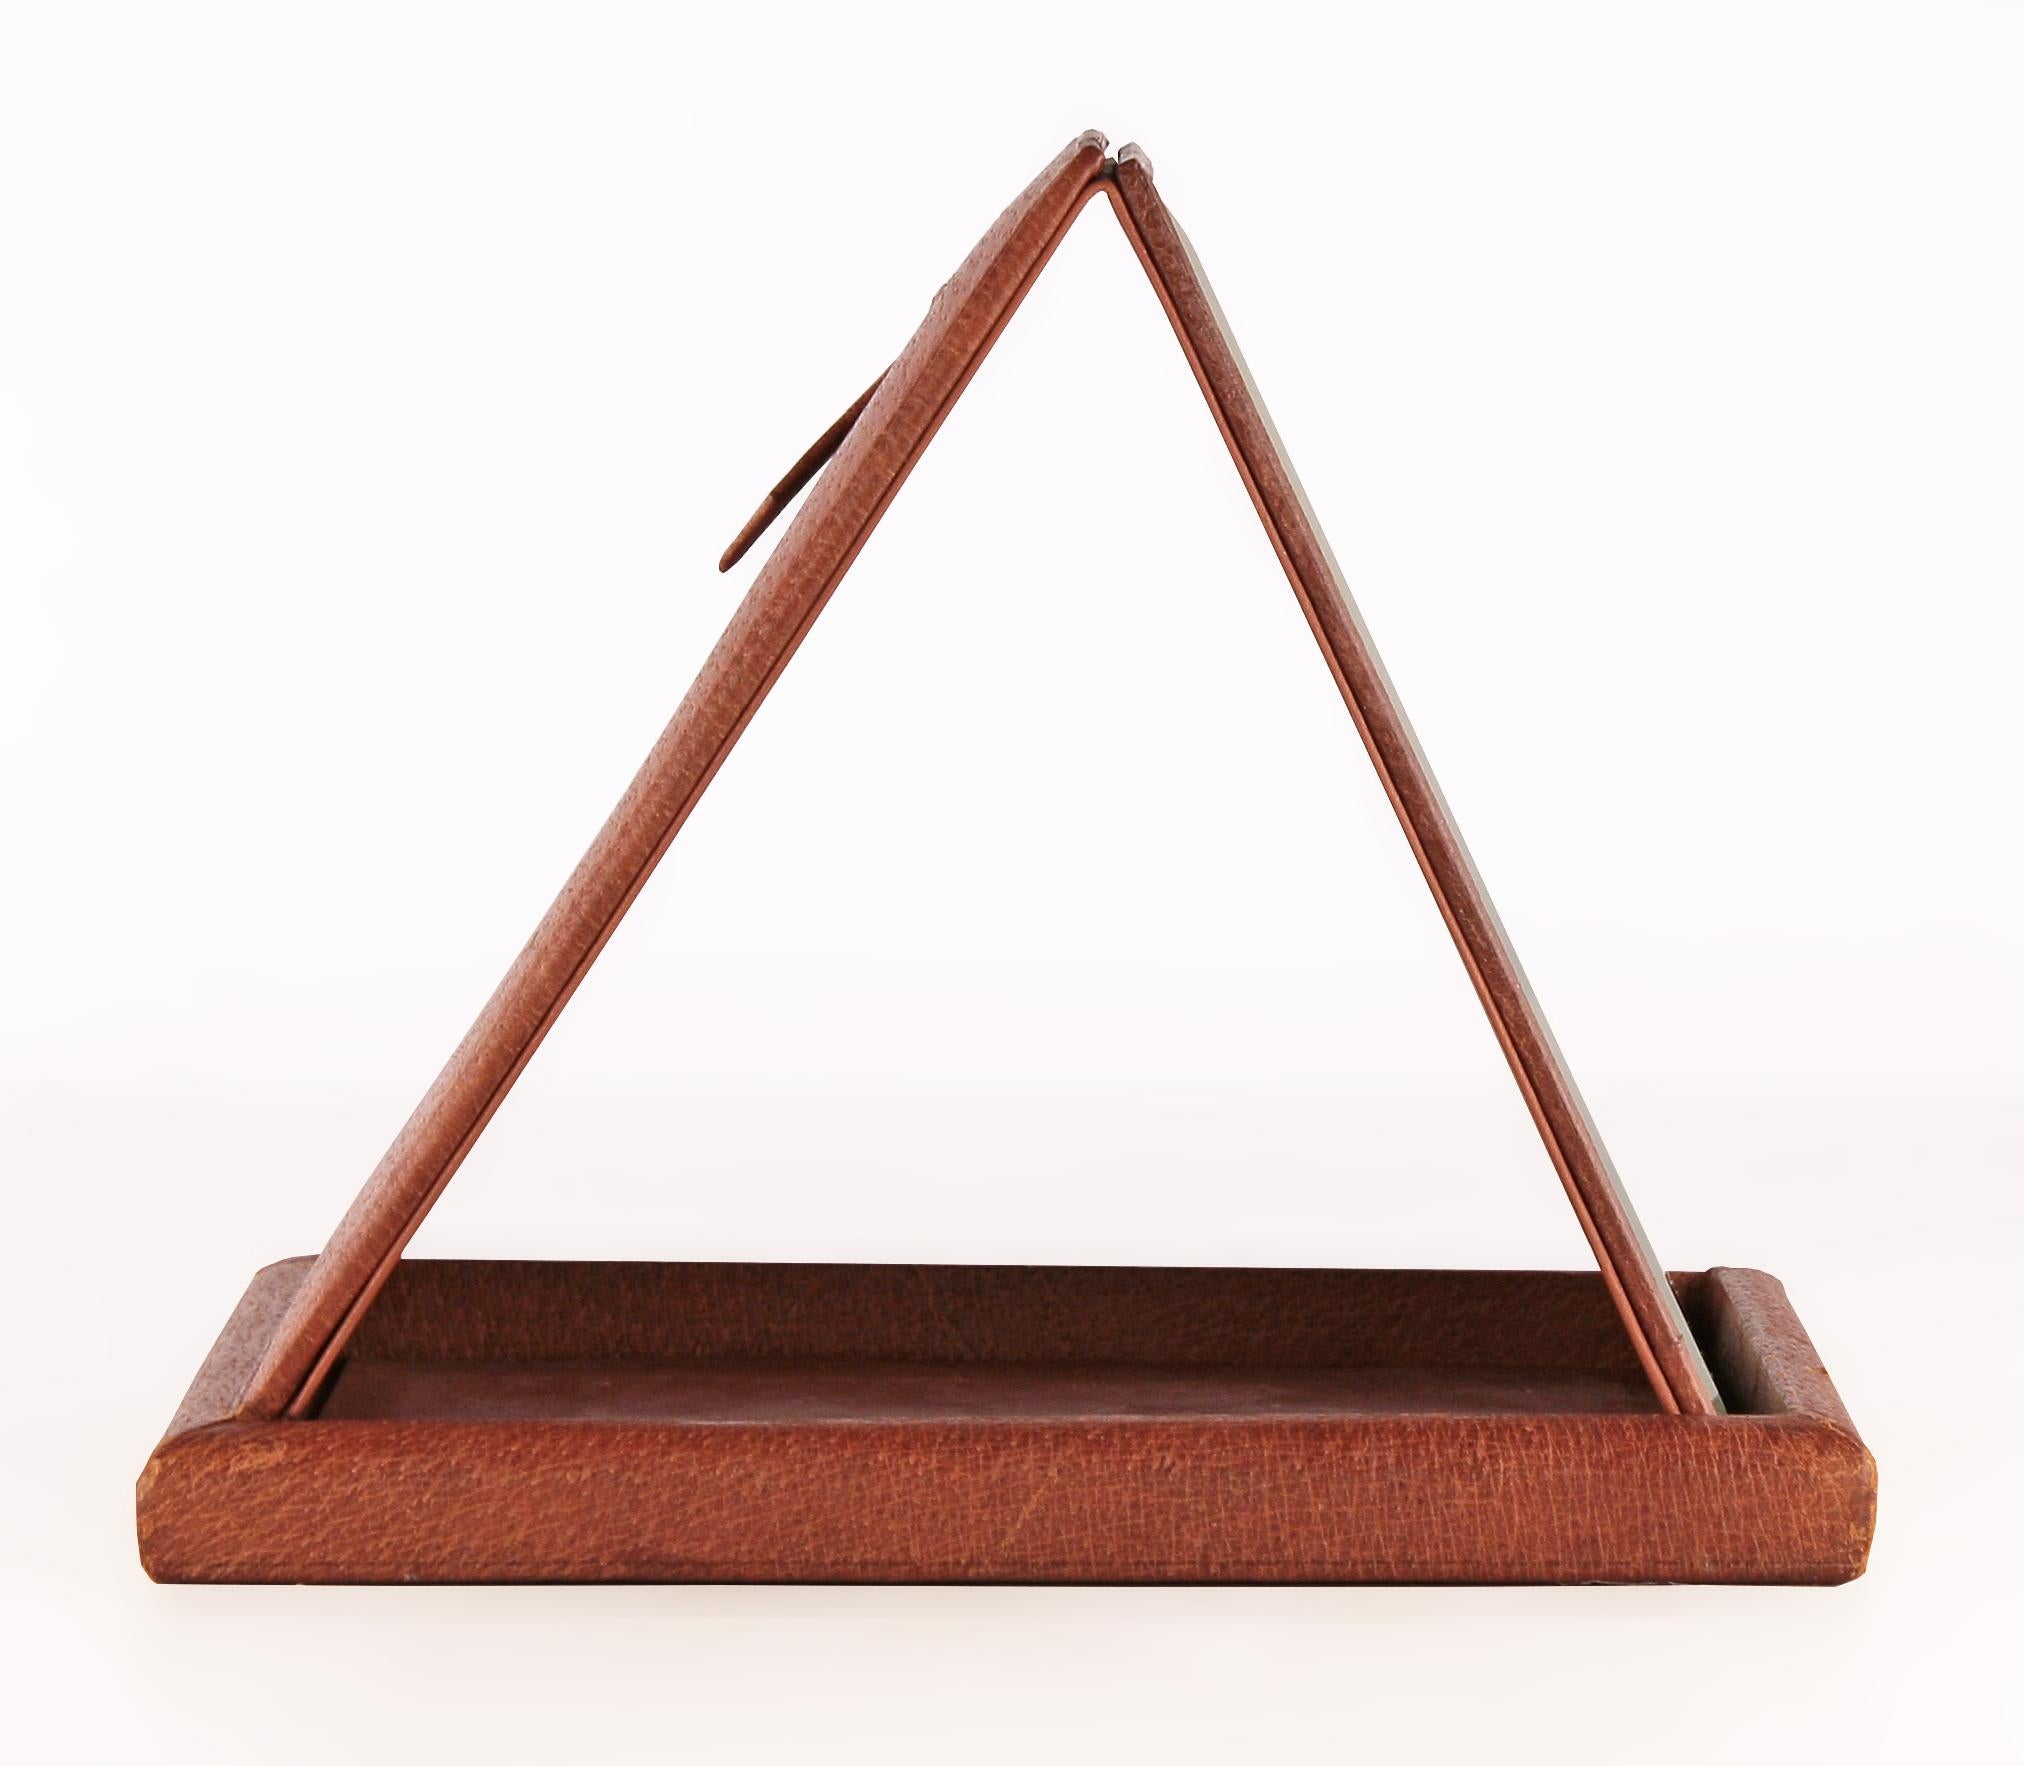 Polished 20th C. Leather and Wood Foldable Beveled Mirror by French Brand Hermès Paris